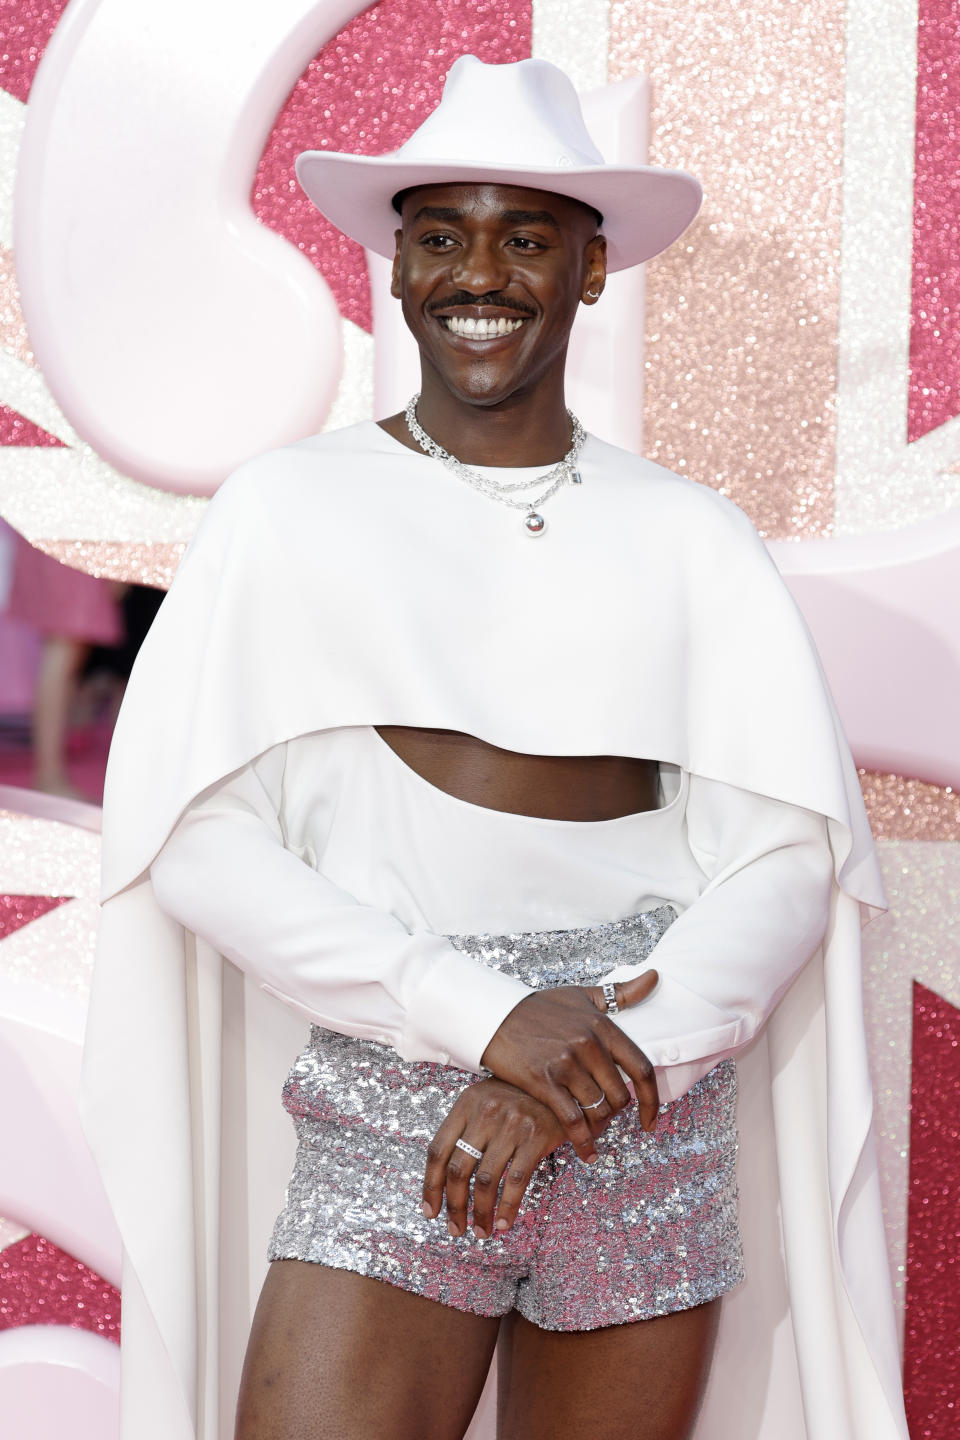 Ncuti Gatwa attends The European Premiere Of "Barbie" at Cineworld Leicester Square on July 12, 2023 in London, England.